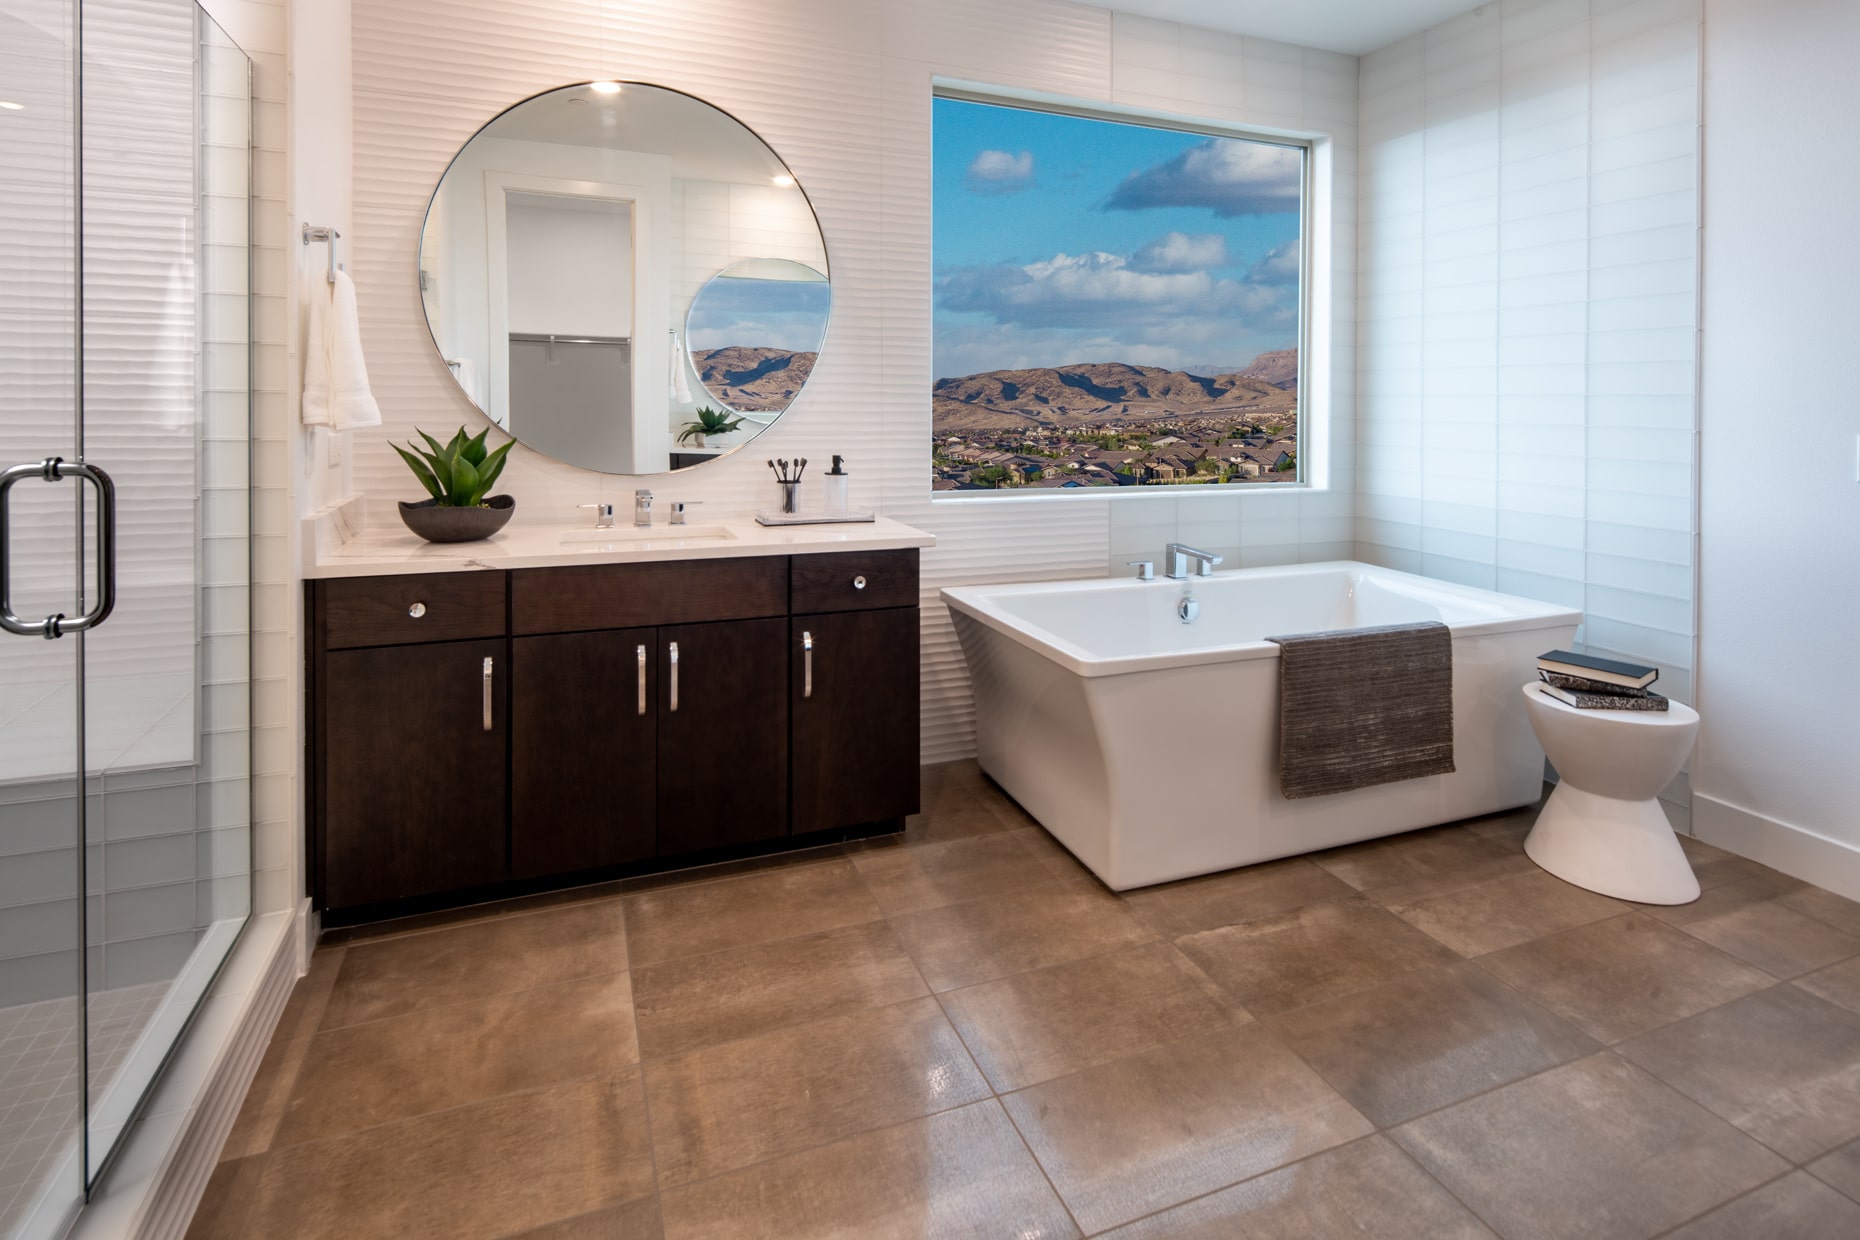 Primary Bathroom of Pesaro Model at Carmel Cliff by Pulte Homes